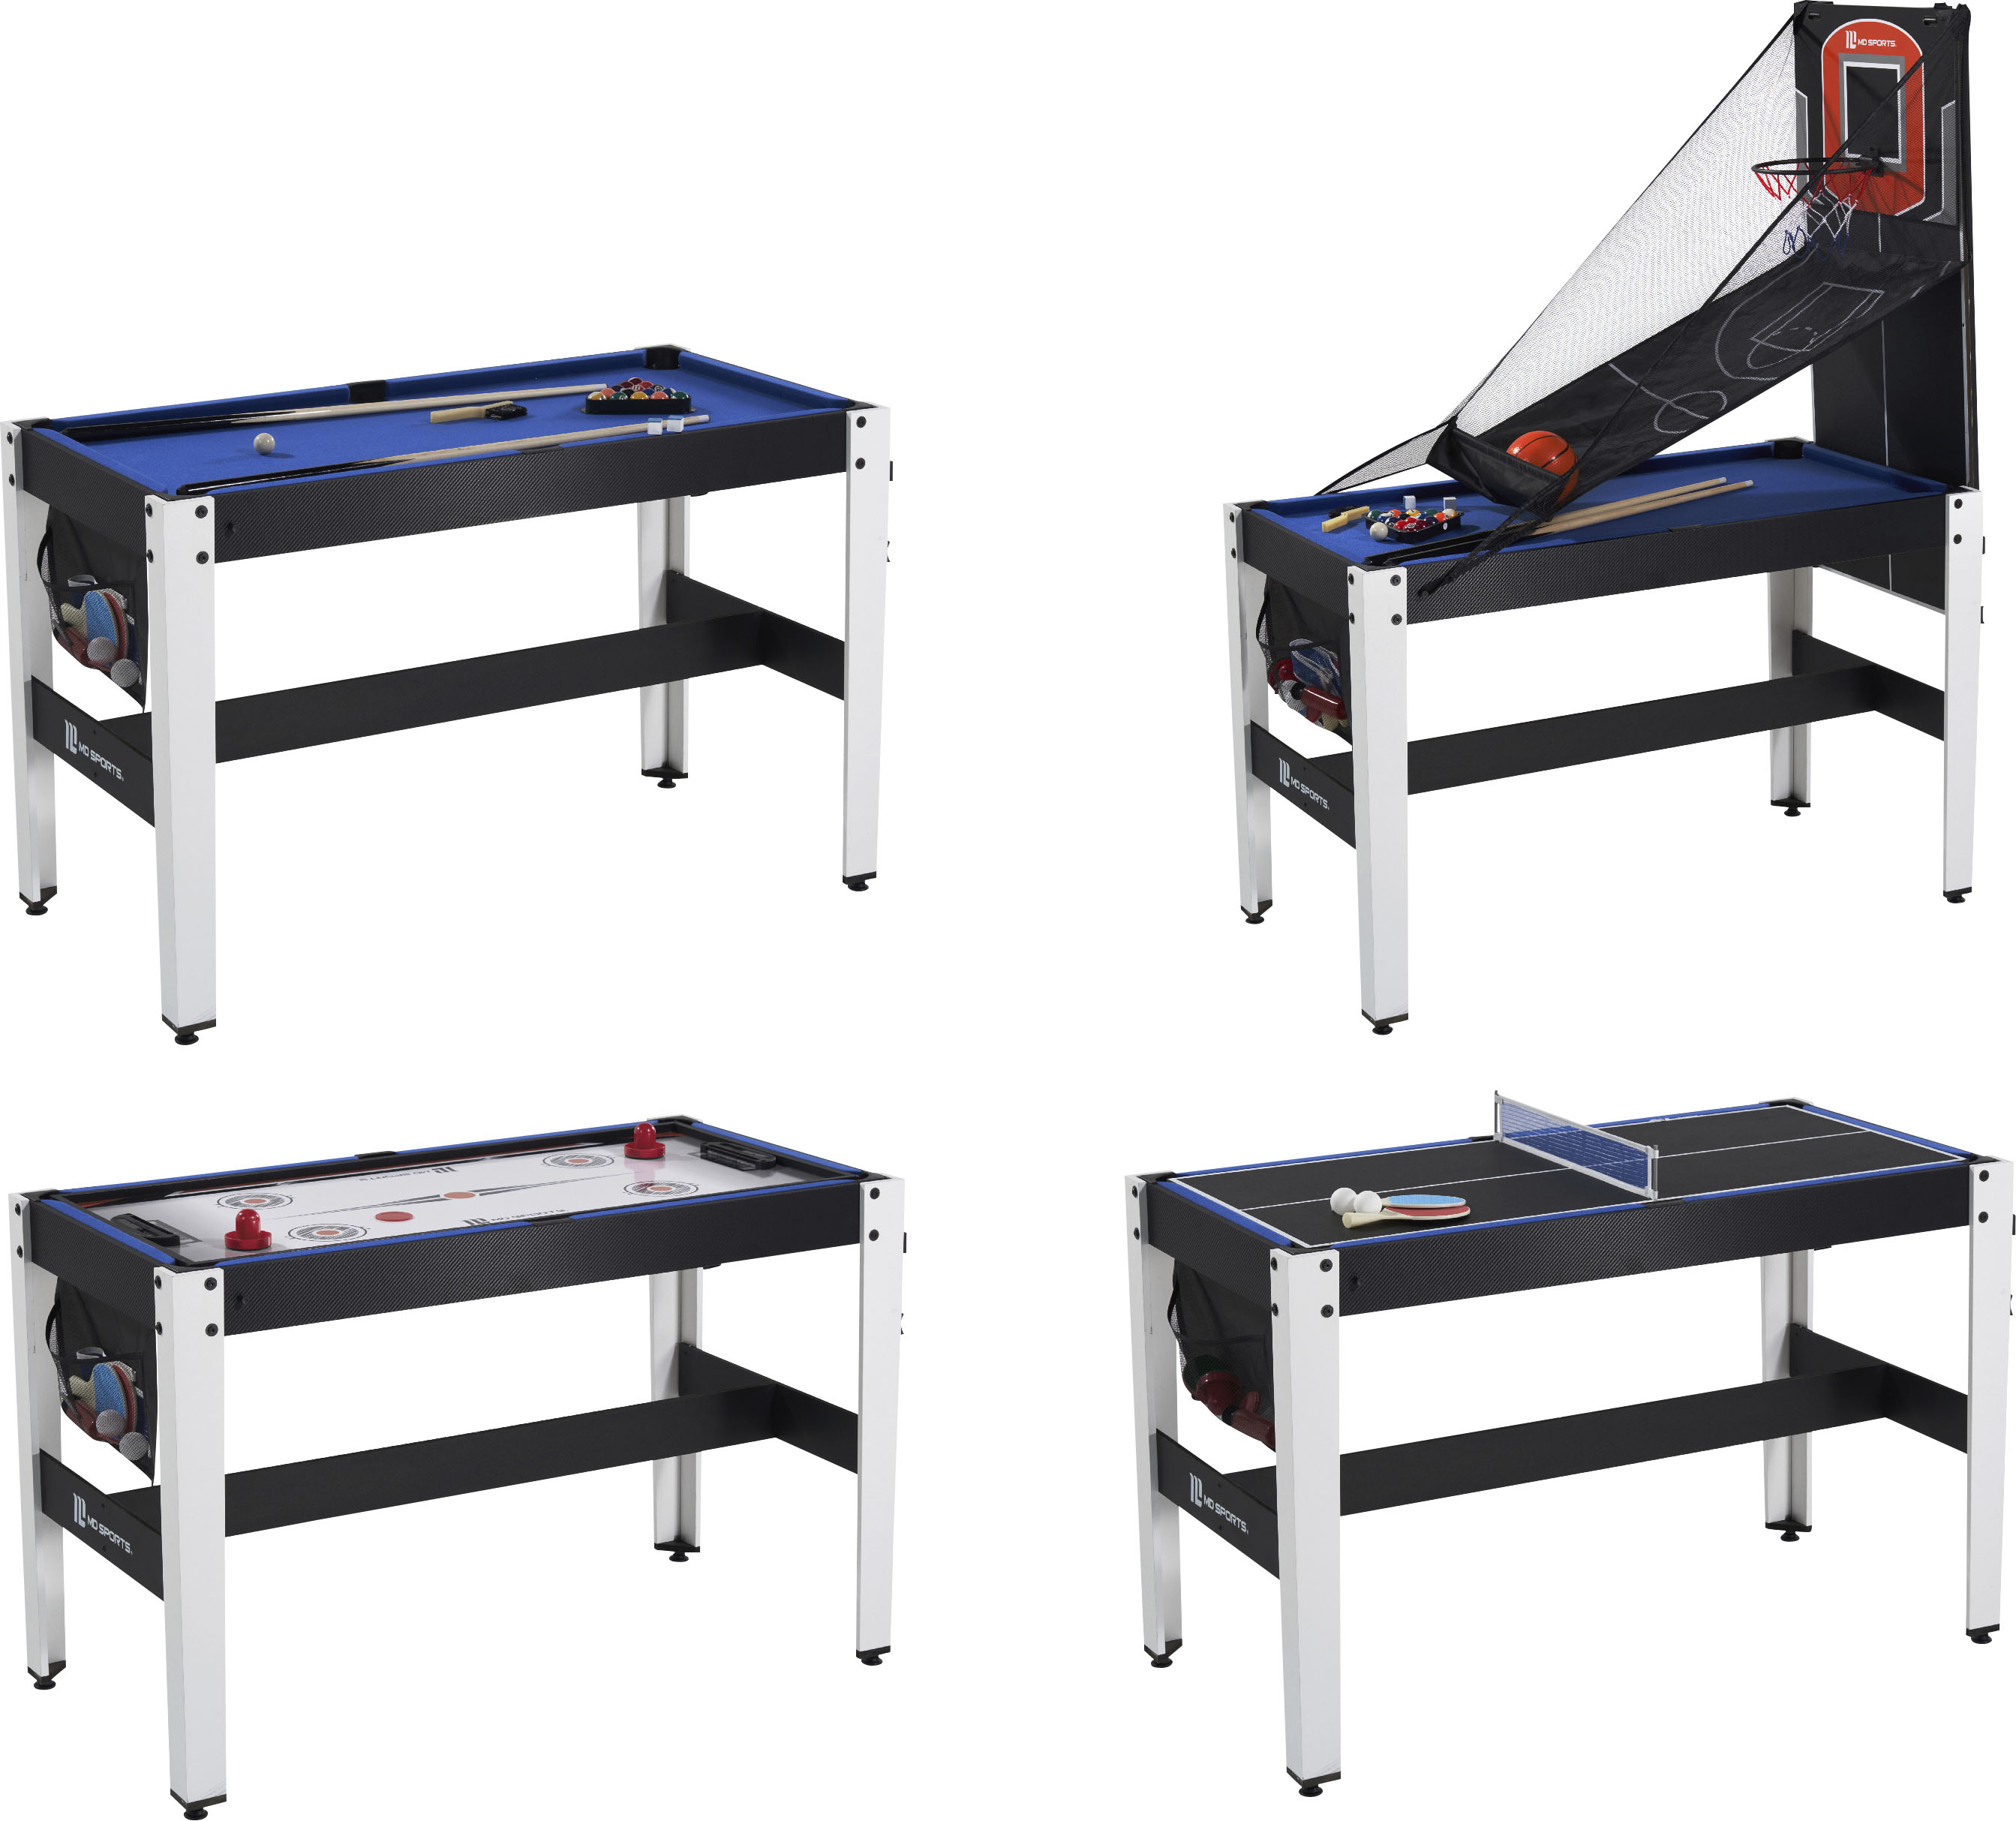 MD Sports Multi Game Table 48"" for sale online 